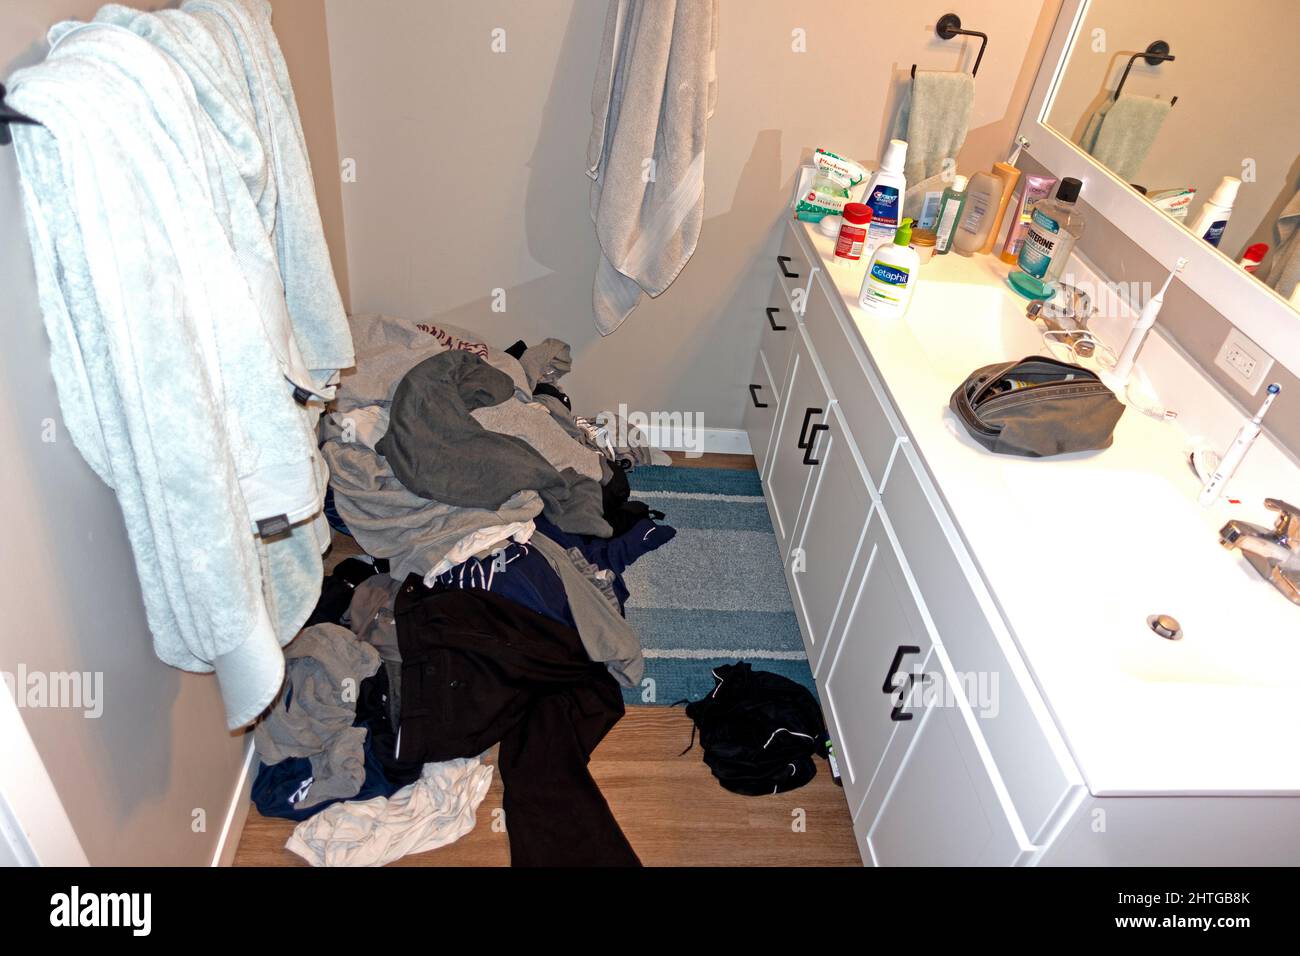 Messy tangle of clothes on the floor in a young men's bathroom. St Paul Minnesota MN USA Stock Photo